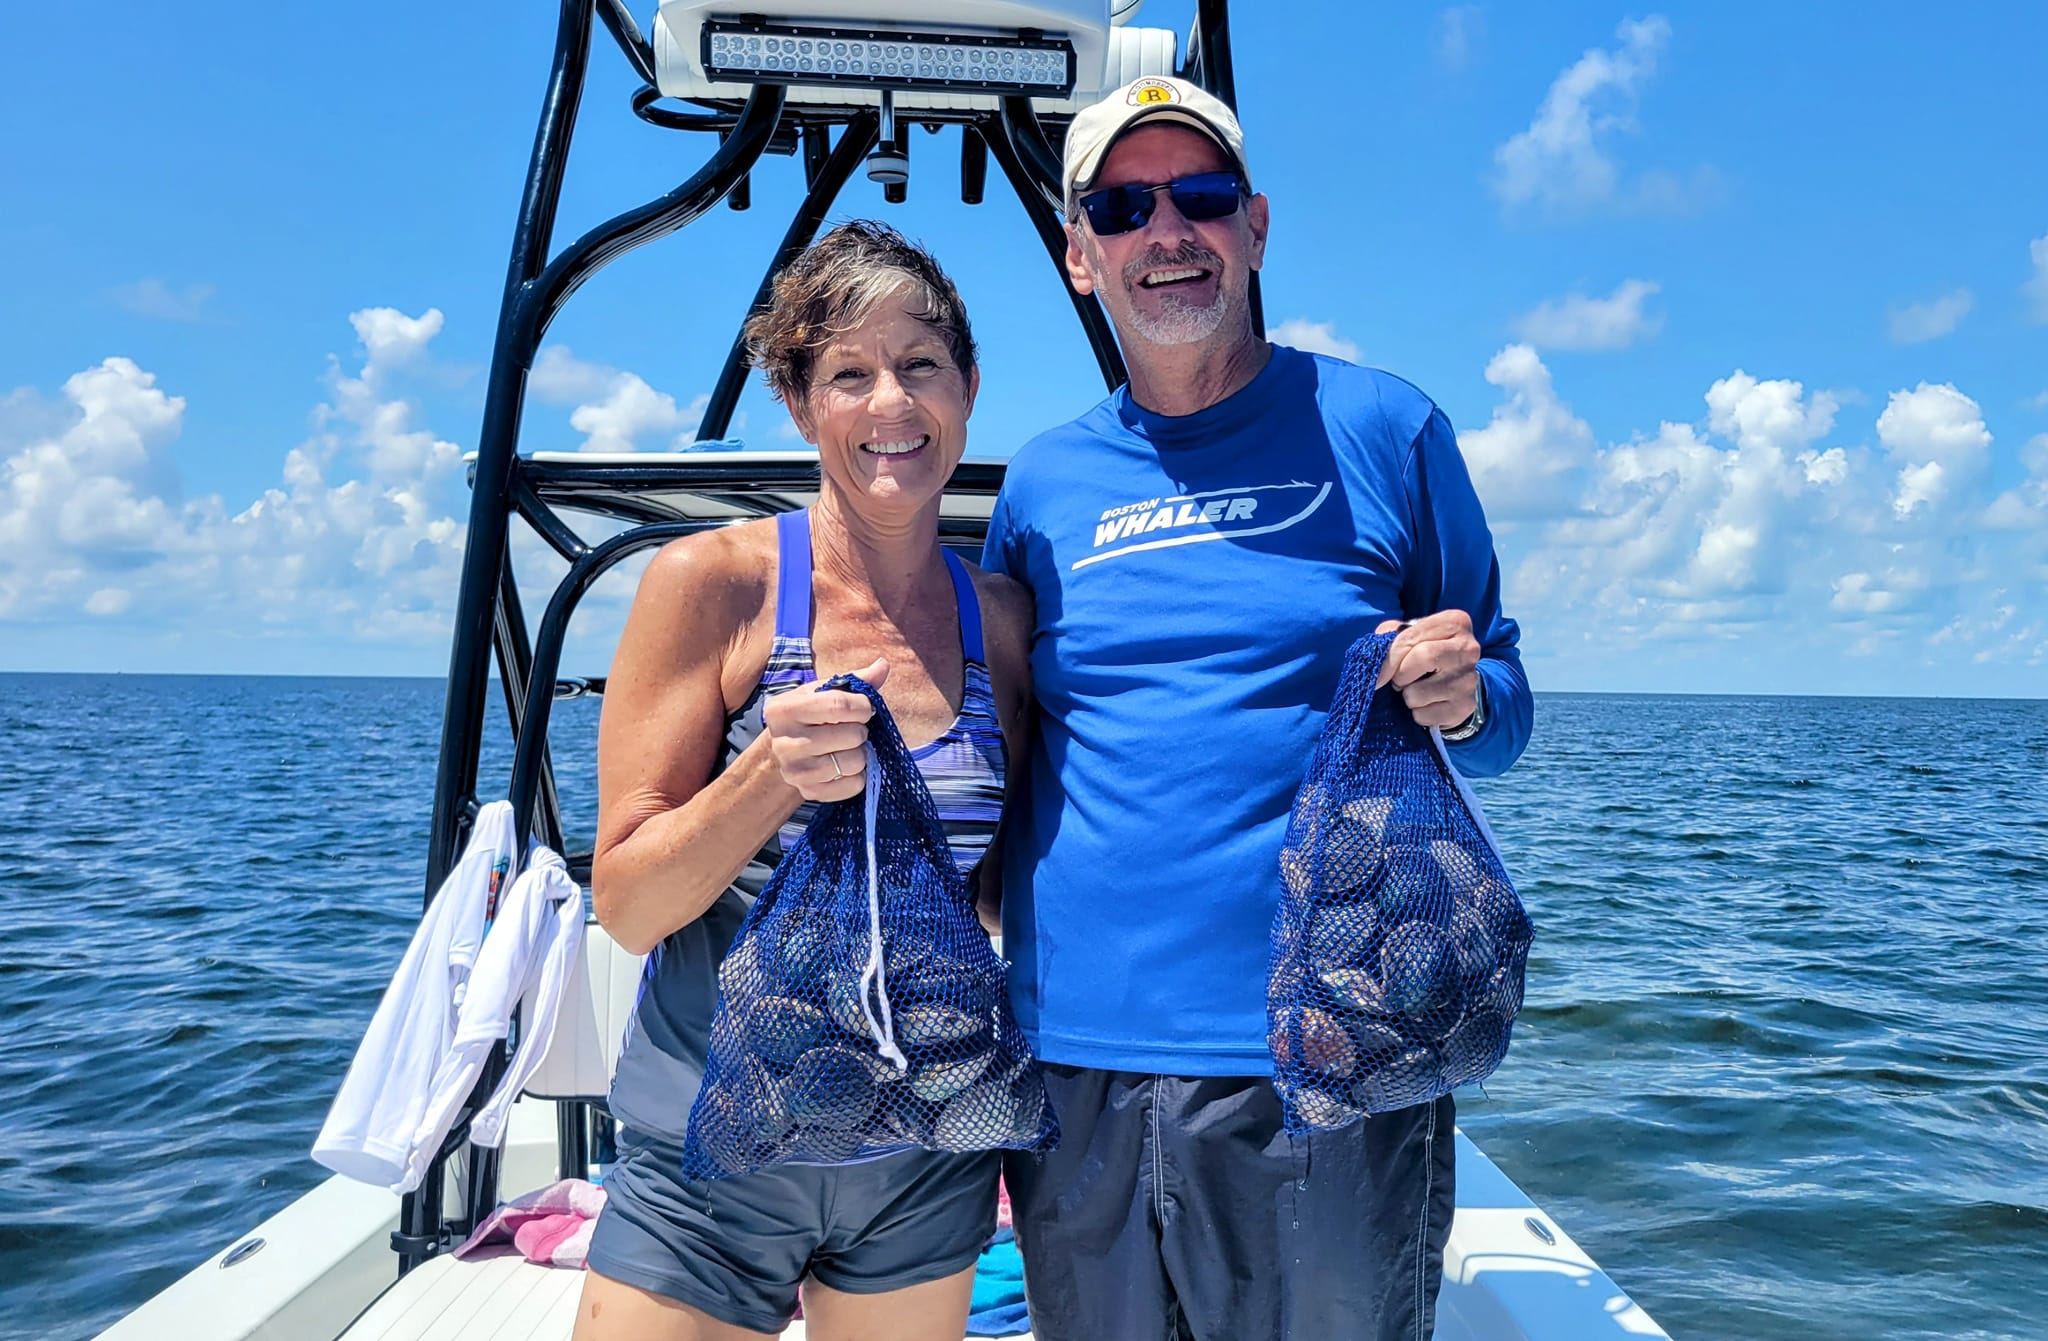 Crystal River Scalloping